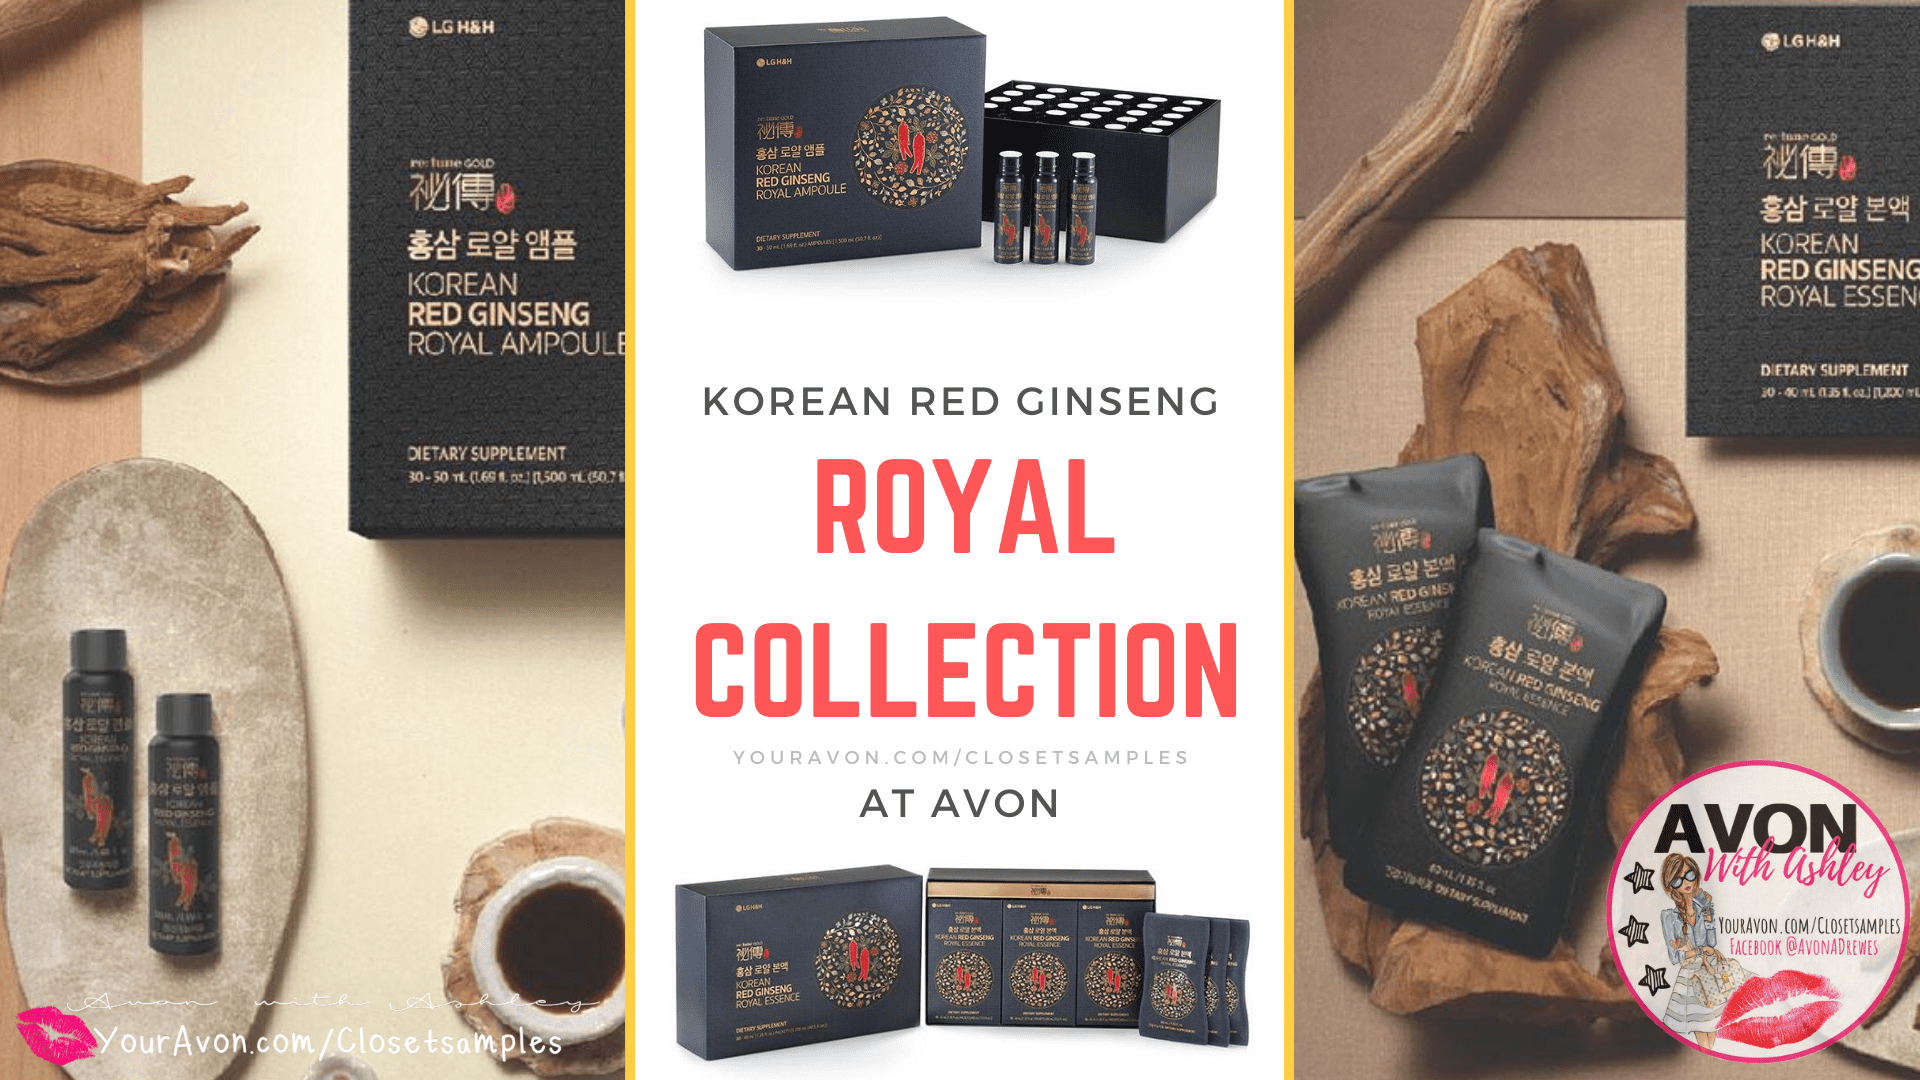 Check out the Re:Tune Korean Red Ginseng Royal Collection At Avon!